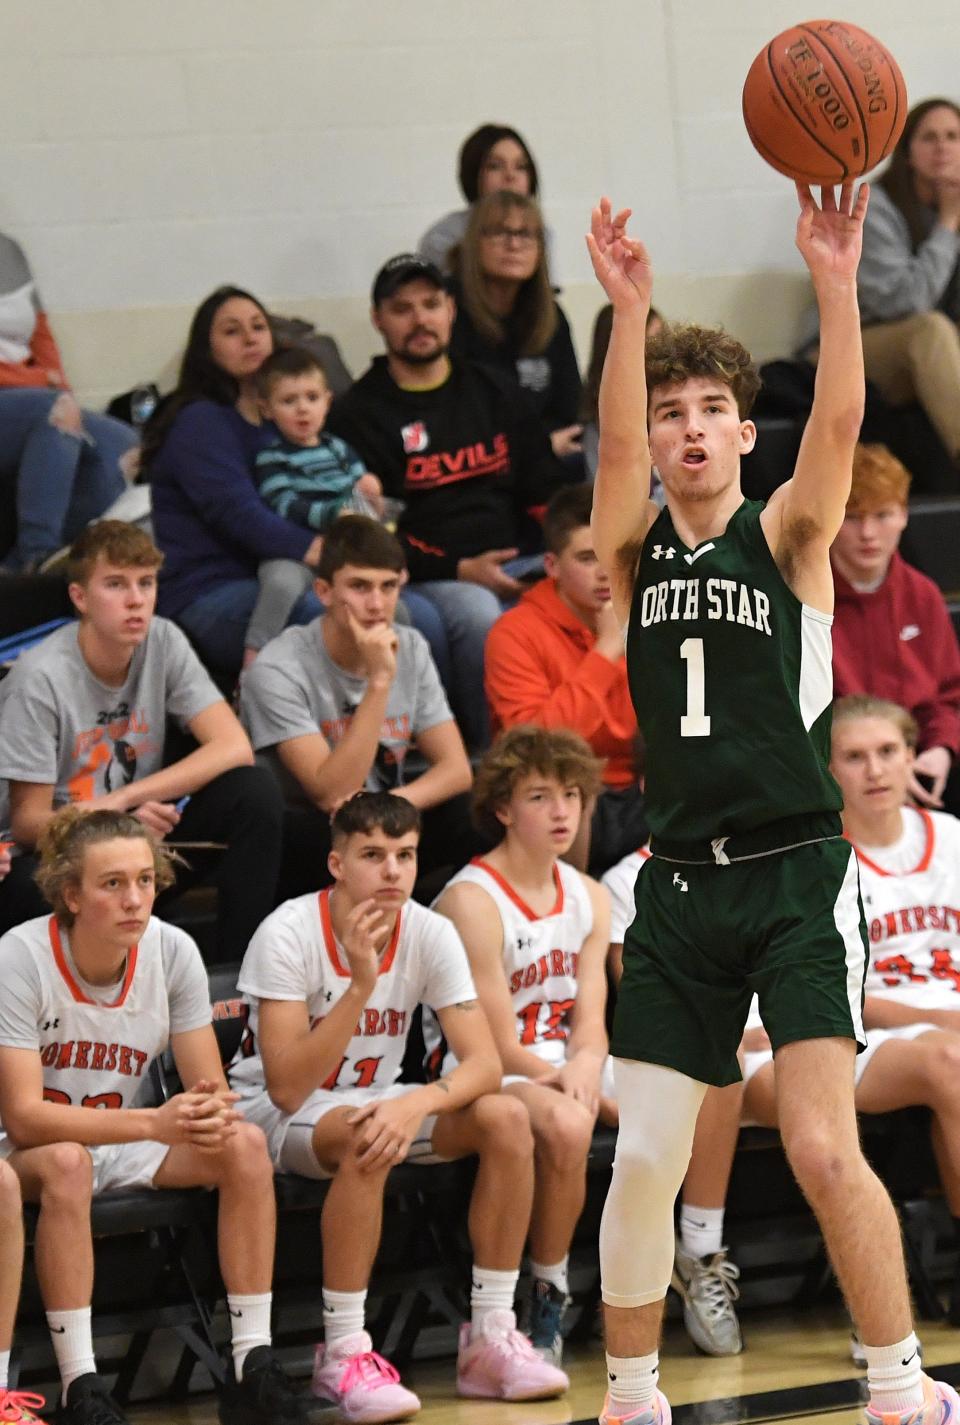 North Star's Brady Weimer drains a three-pointer in front of the Somerset bench during the championship game of the Pine Grill Roundball Classic, Dec. 3, in Somerset.